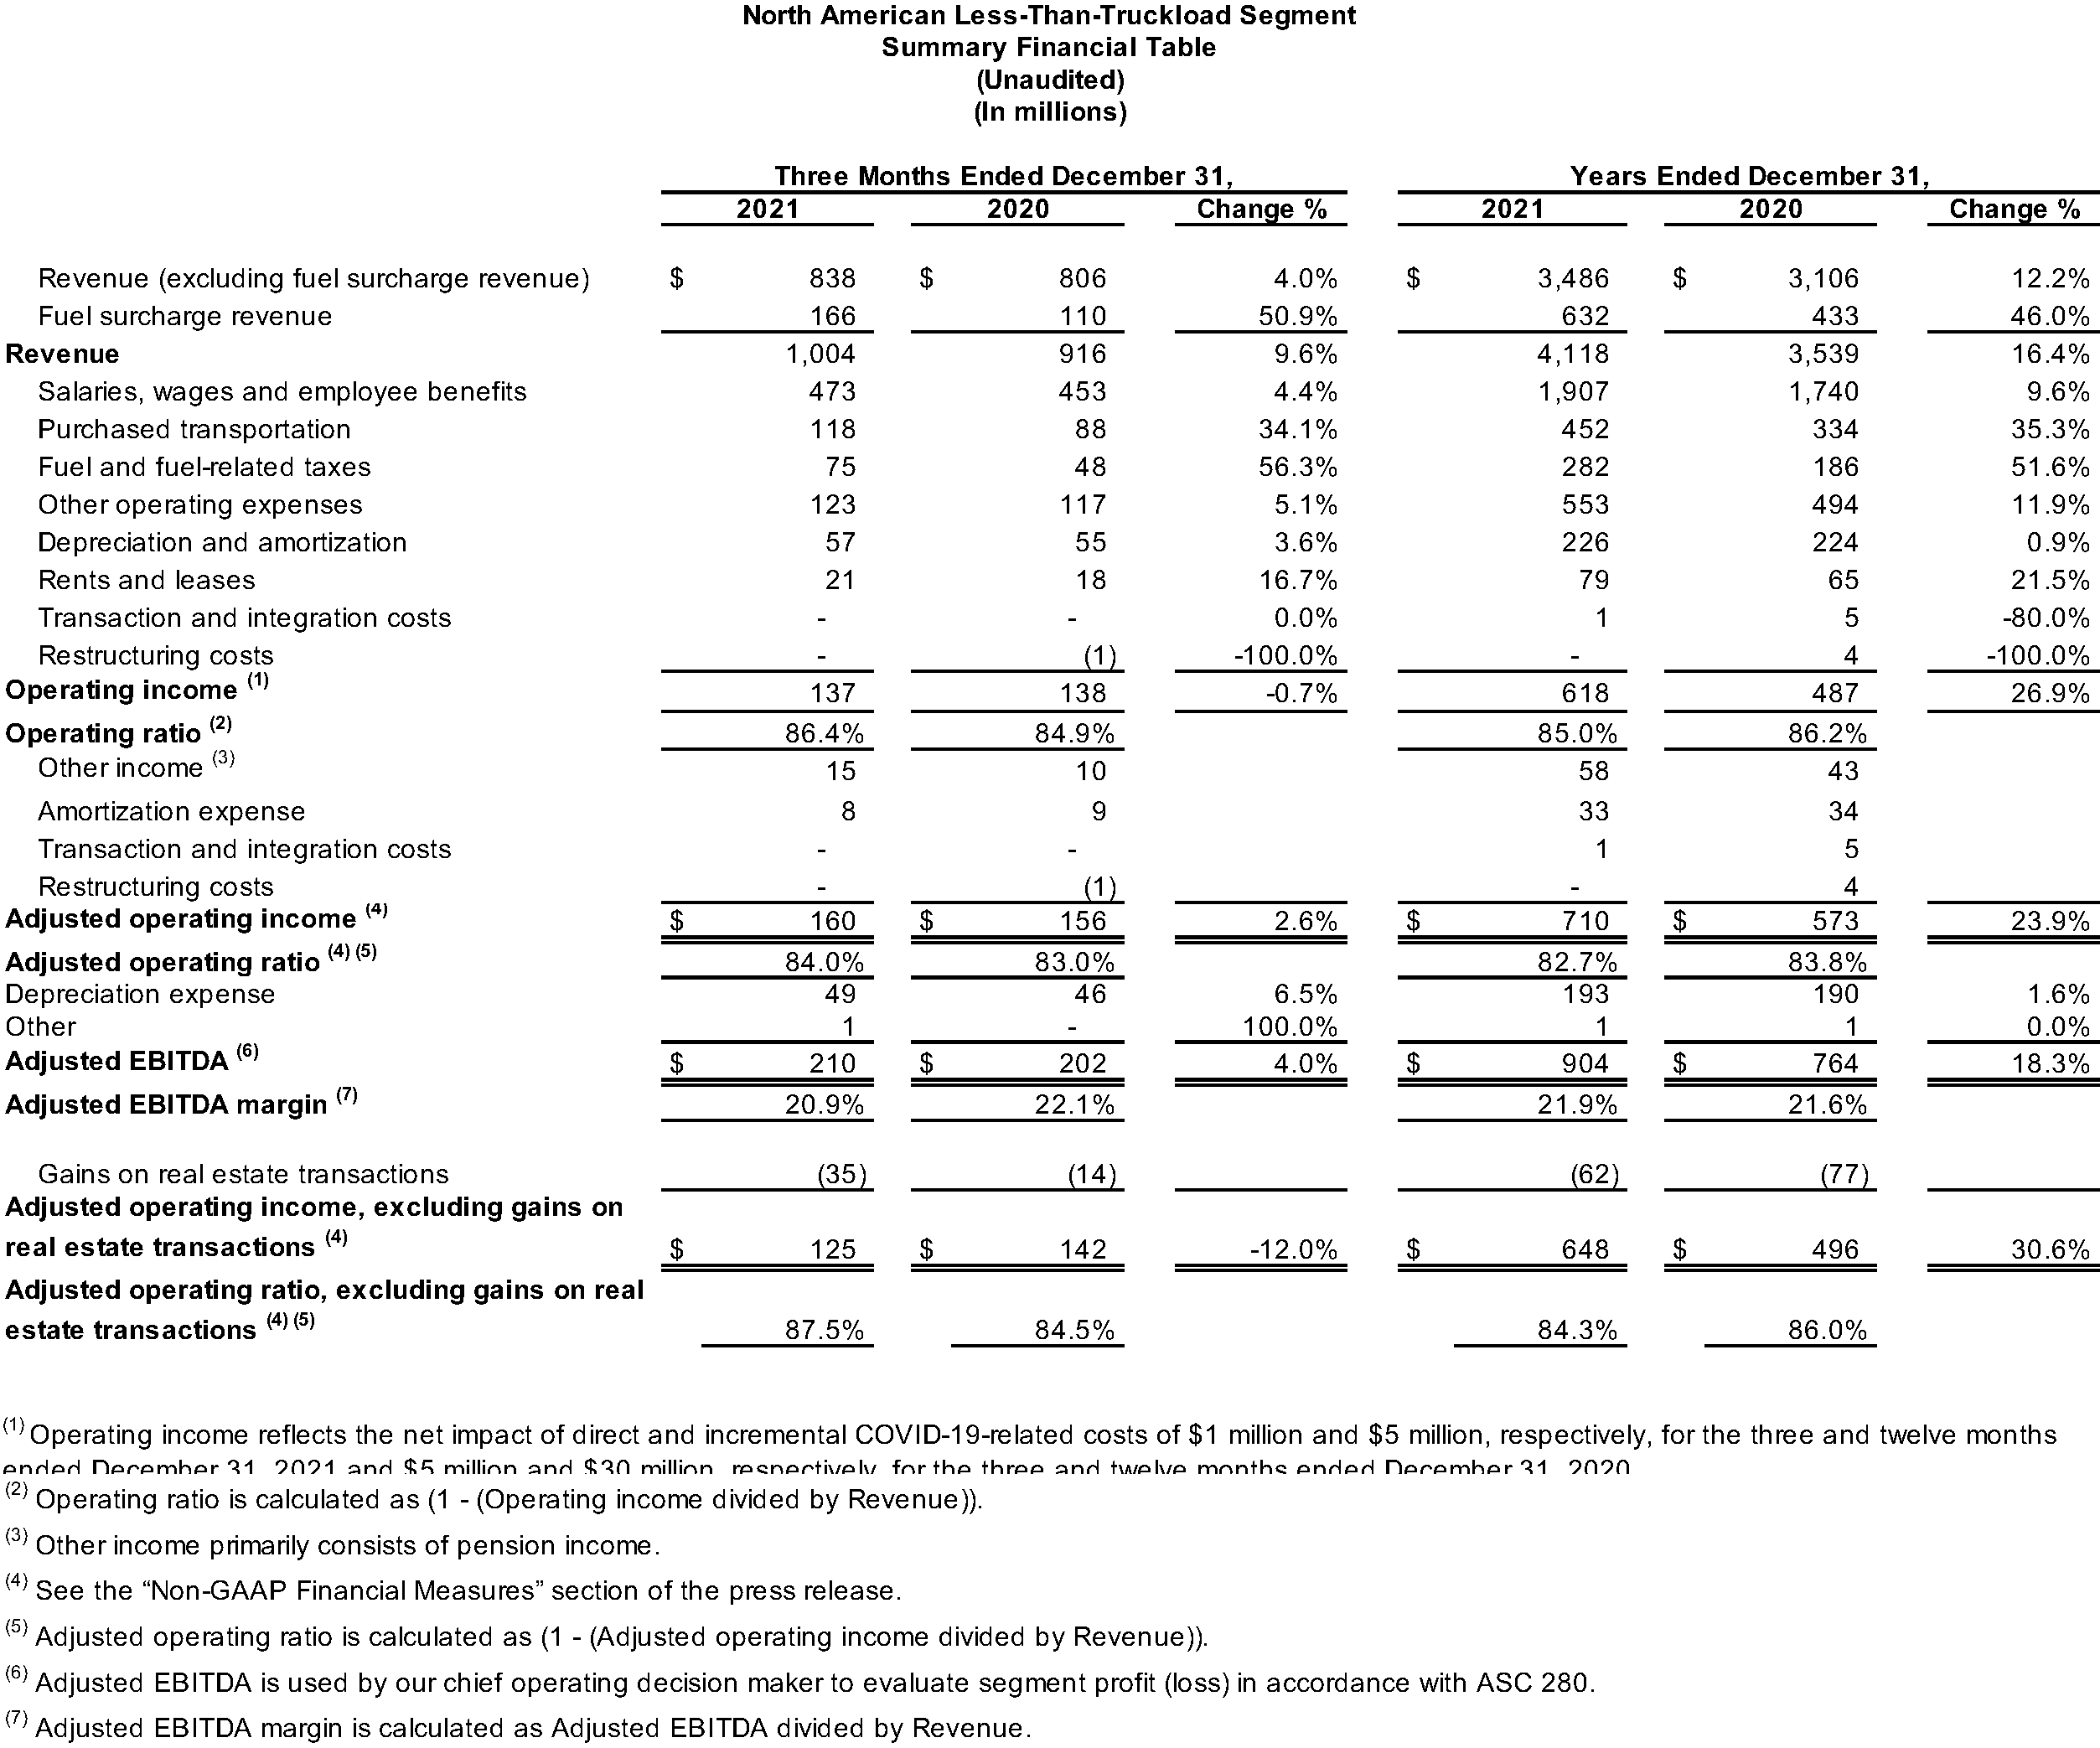 North American Less-Than-Truckload Segment Summary Financial Table